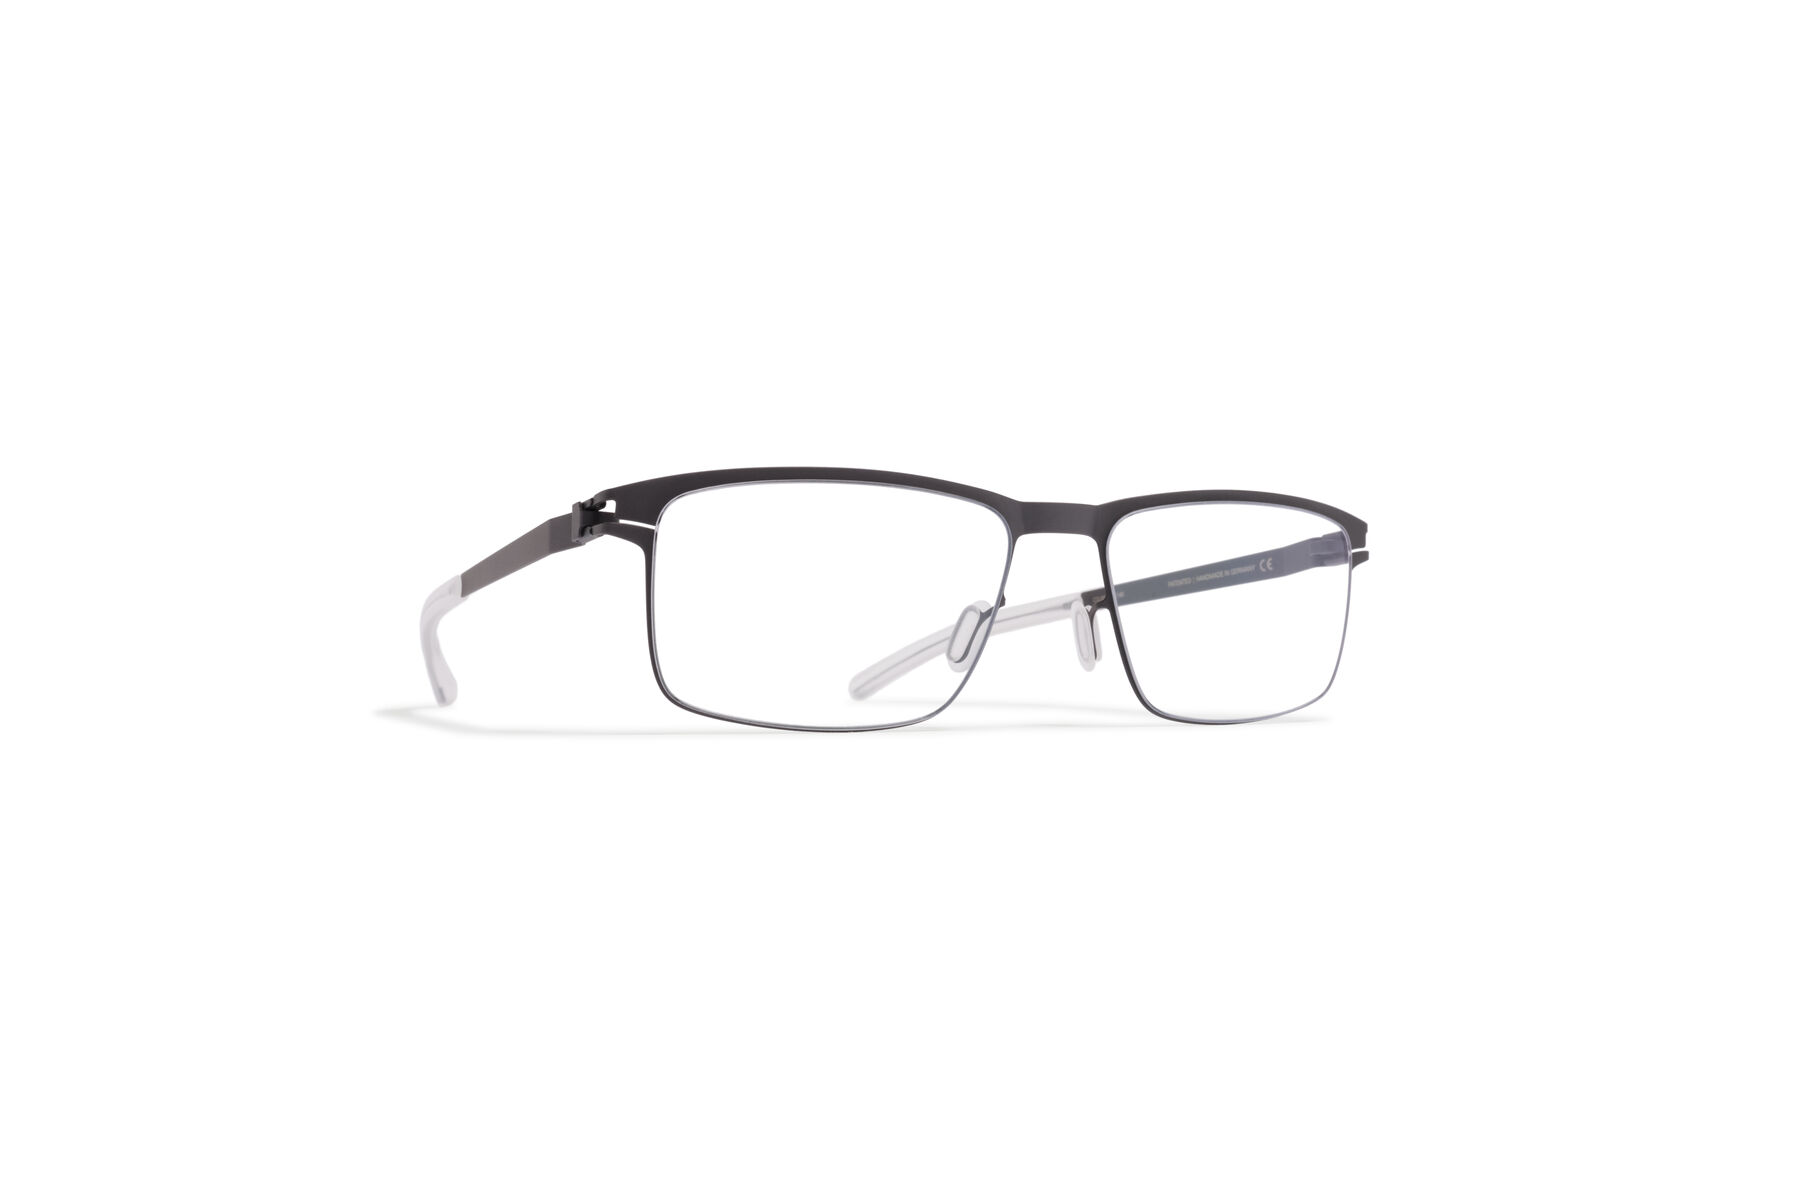 A pair of glasses

Description automatically generated